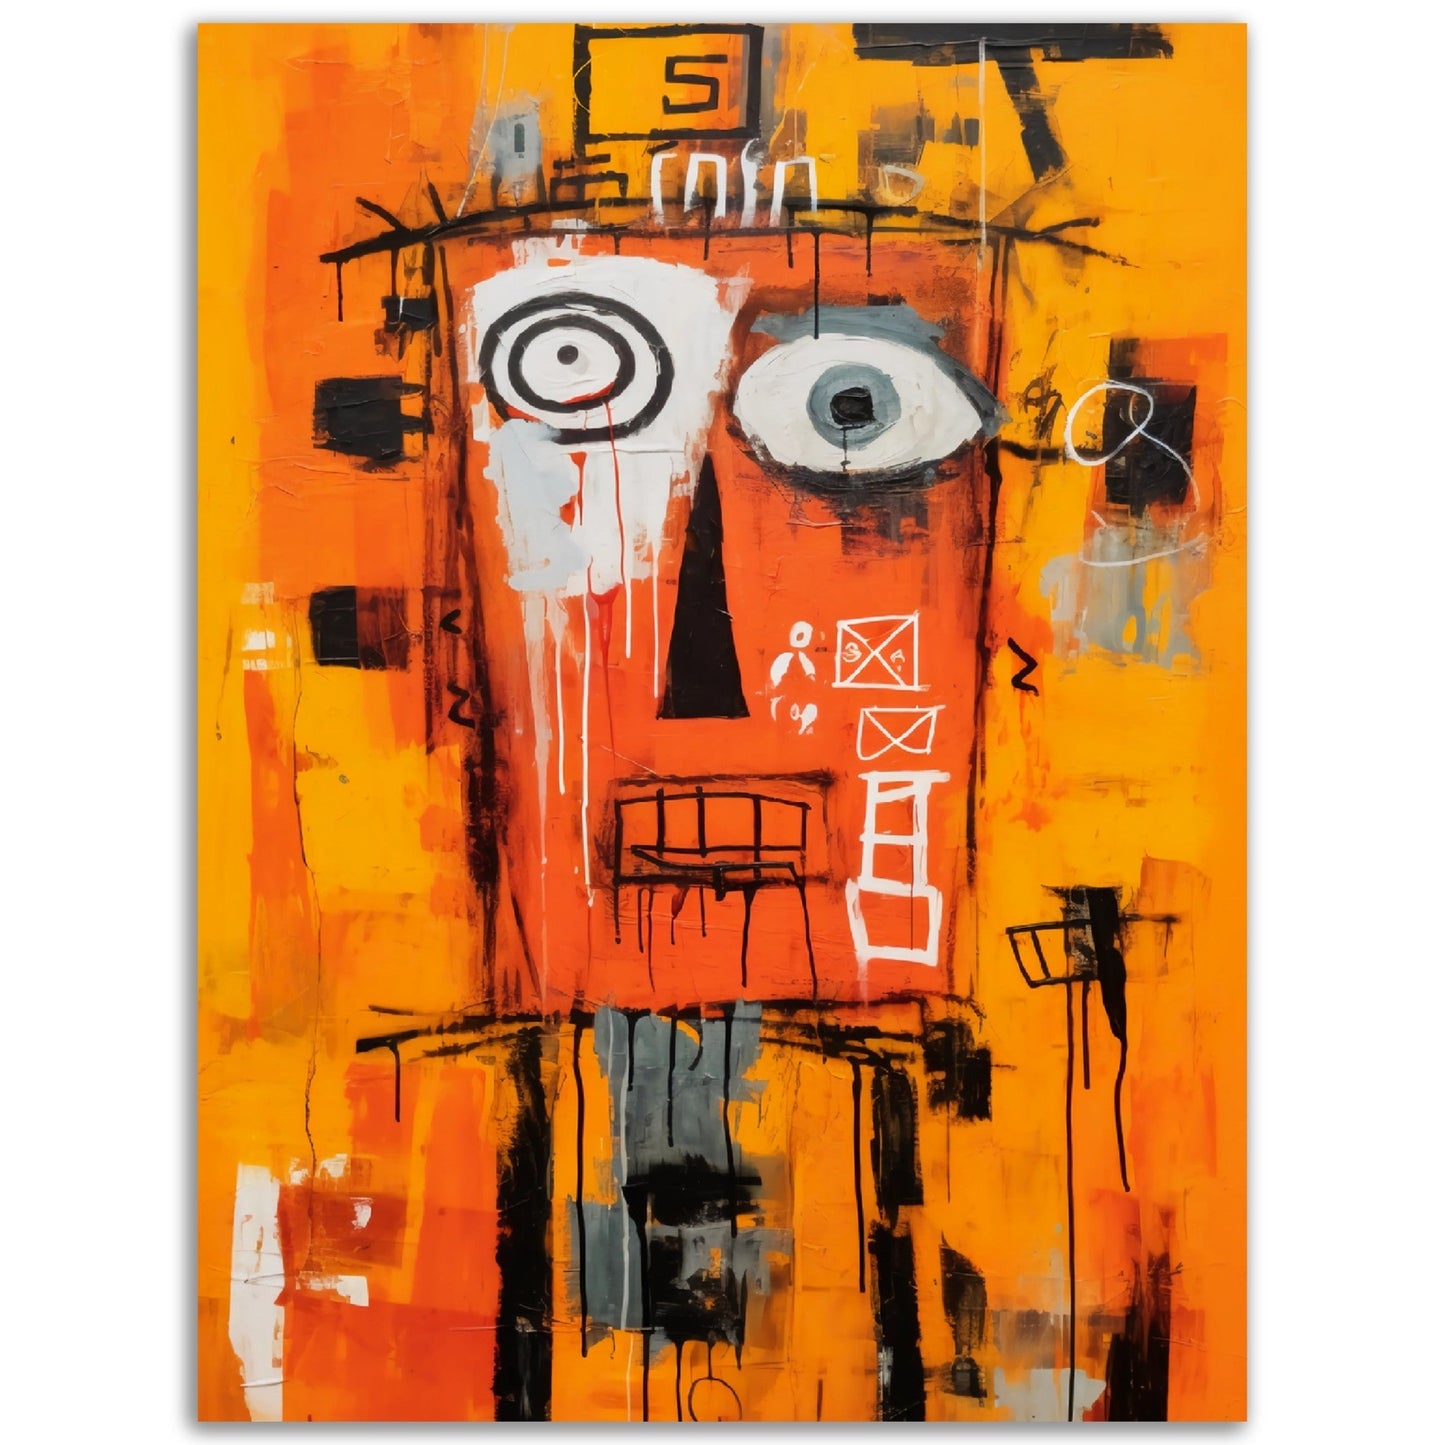 A Pop Art painting featuring an orange background and a striking black face. Perfect for adding a pop of color to any space, this Extreme Ways wall art is sure to make a statement. Whether decorating a